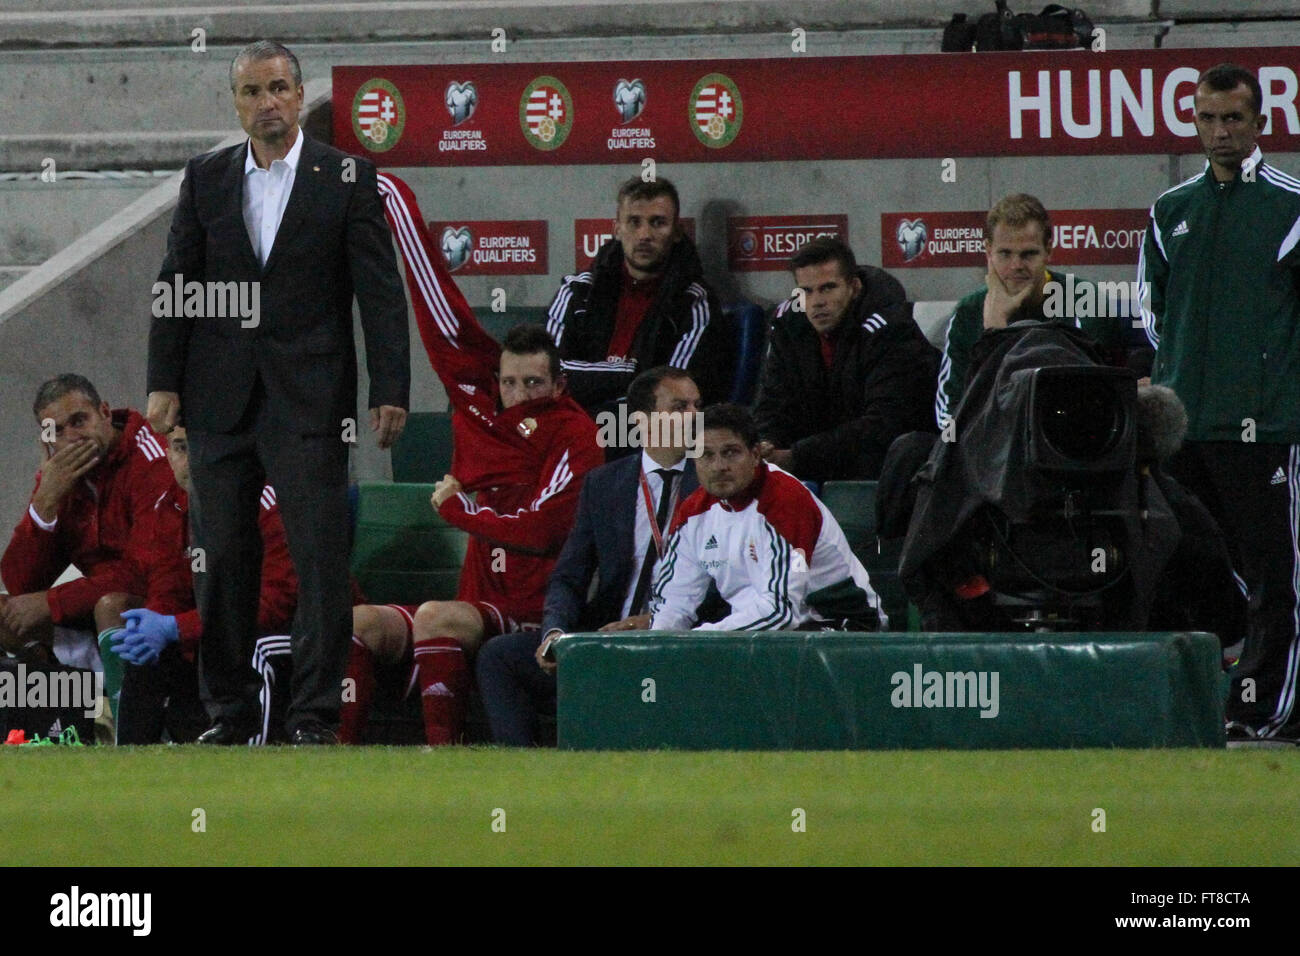 07 Sept 2015 - Euro 2016 Qualifier - Group F - Northern Ireland 1 Hungary 1. Hungary's manager Bernd Storck (left) watches his team in action. Stock Photo